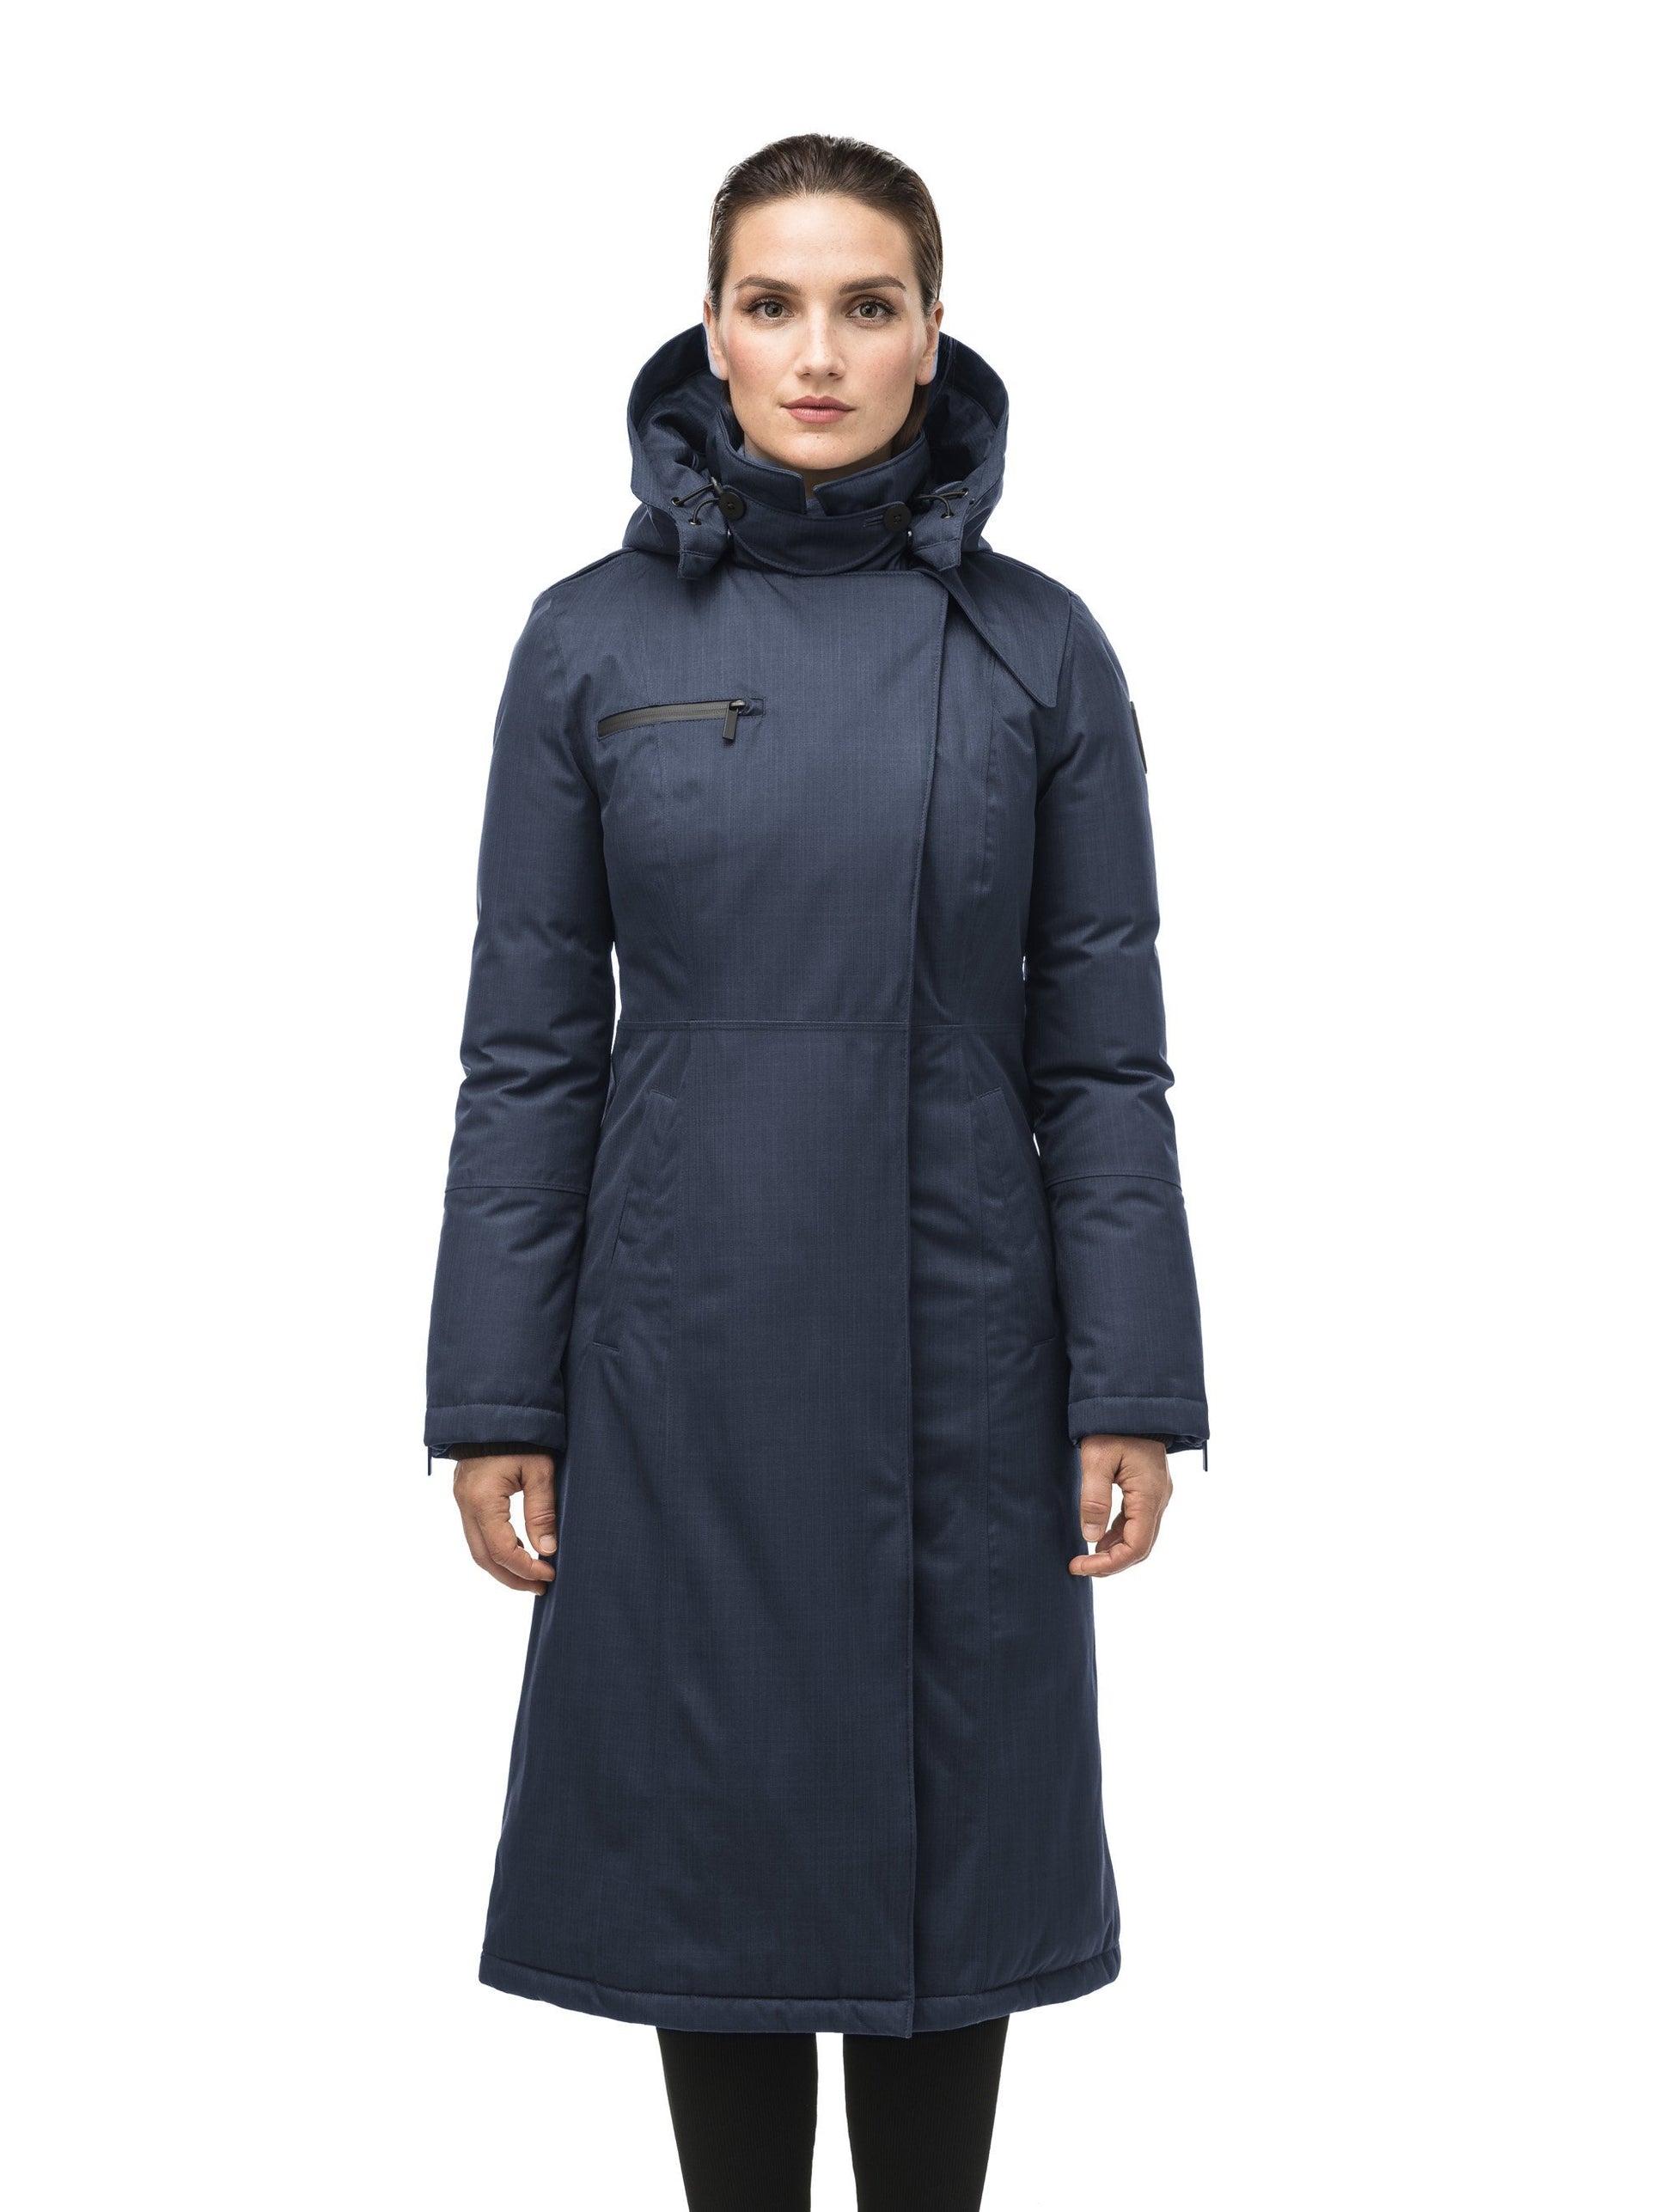 Long calf length women's trench inspired parka with removable fur trim around the hood and an asymetric closure in Navy